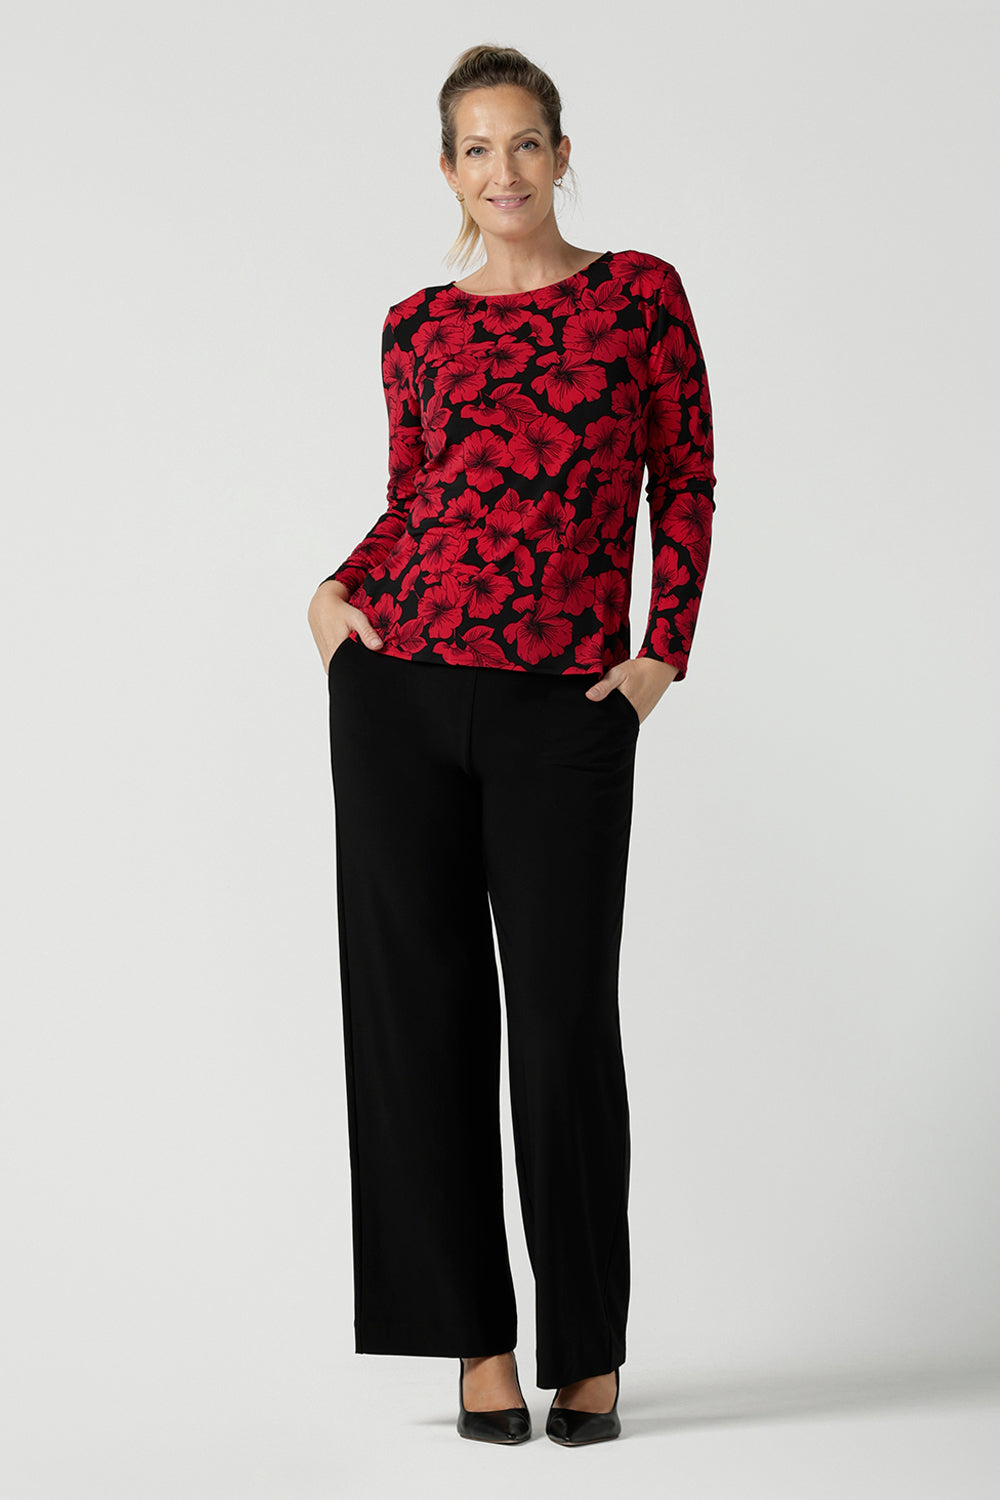 Size 10 woman wears the Mason top in Bold Poppy . A long sleeve jersey top for women with red floral on a black base. Comfortable work top for women size 8 - 24. Soft jersey fabric and made in Australia for women. Styled back with the Monroe pant in black a straight leg pant. 